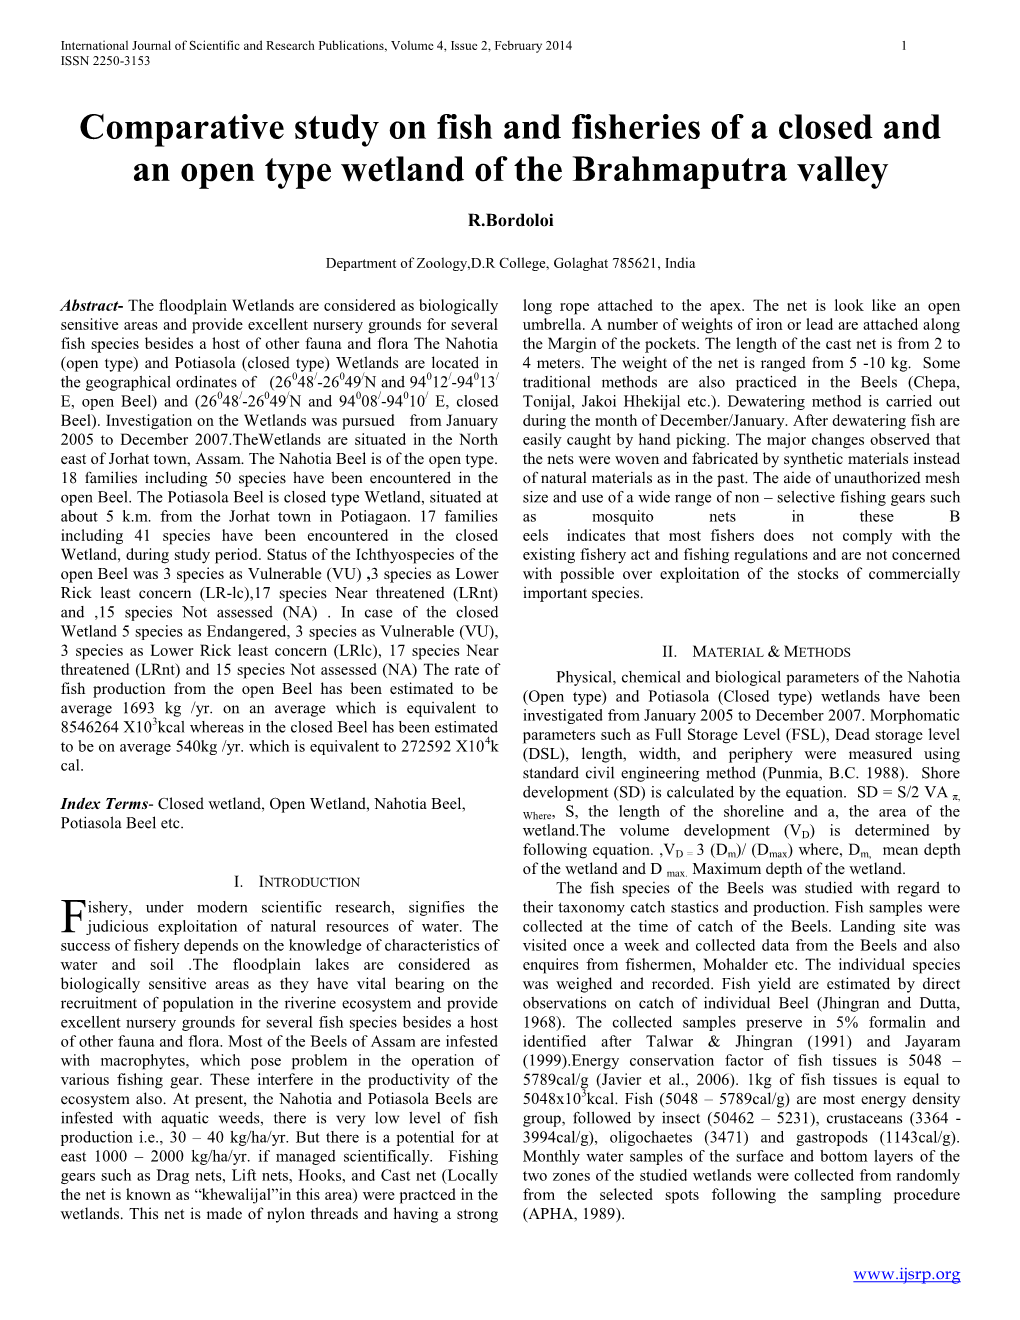 Comparative Study on Fish and Fisheries of a Closed and an Open Type Wetland of the Brahmaputra Valley